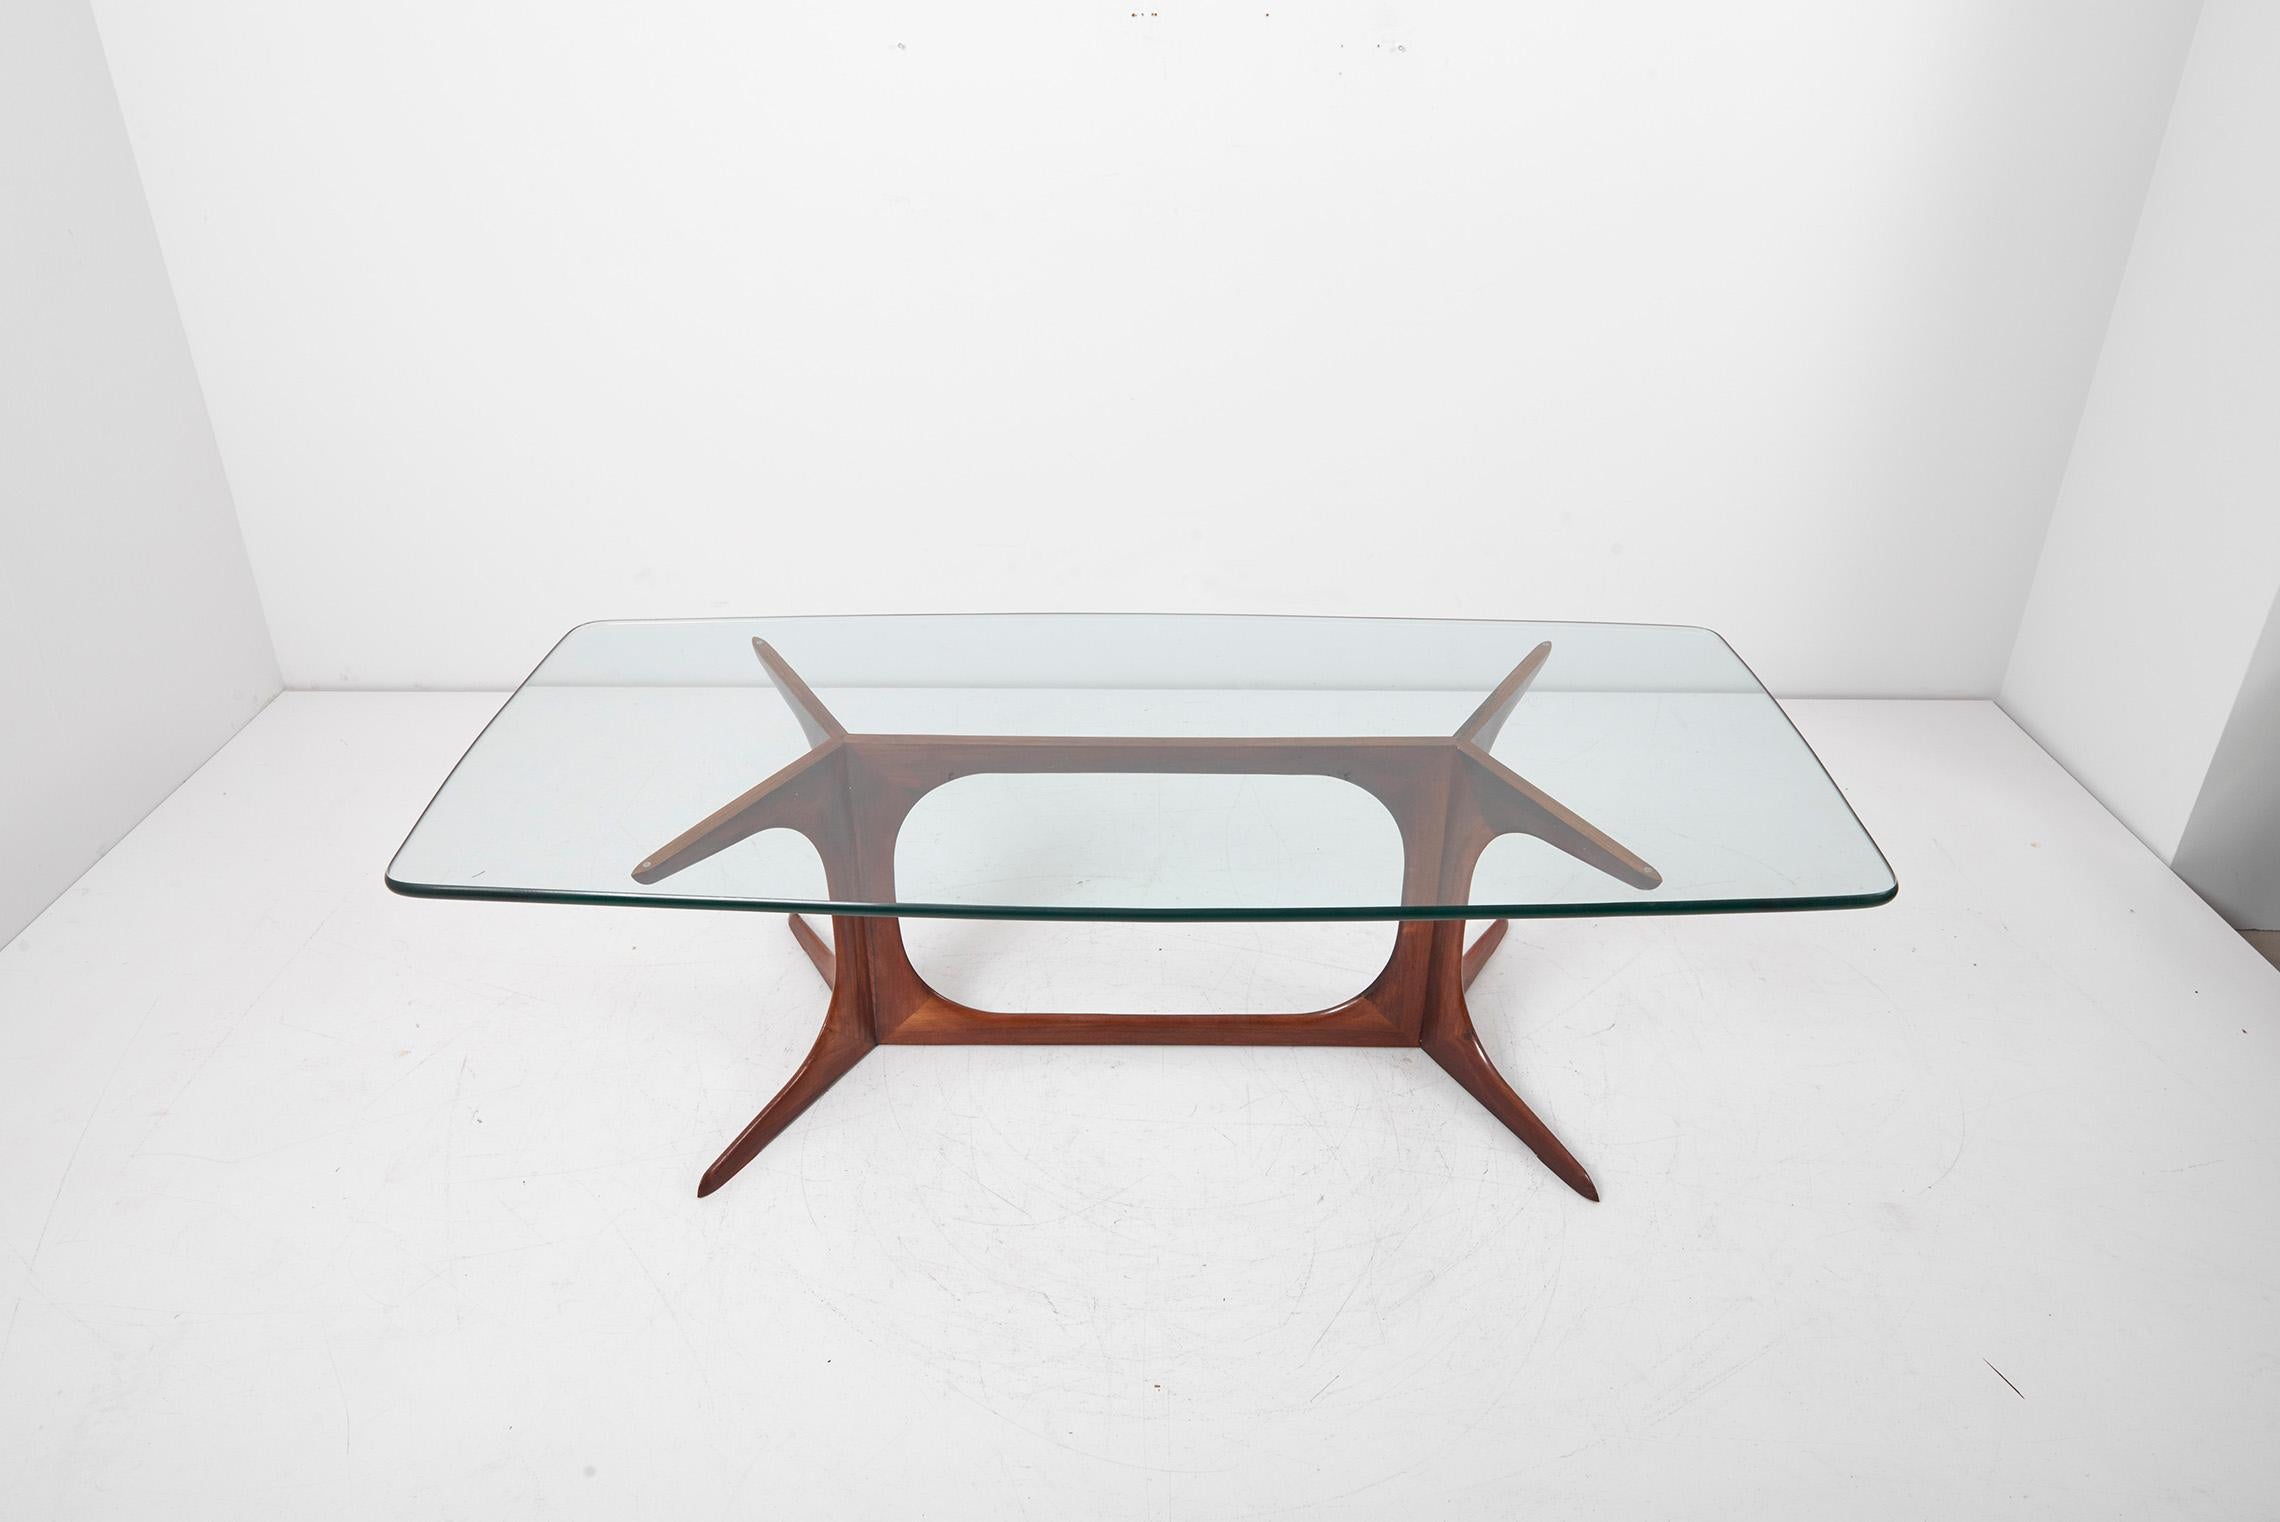 Glass side or coffee table, Denmark 1960s in very good condition.
The shape is very freeform and highly crafted.